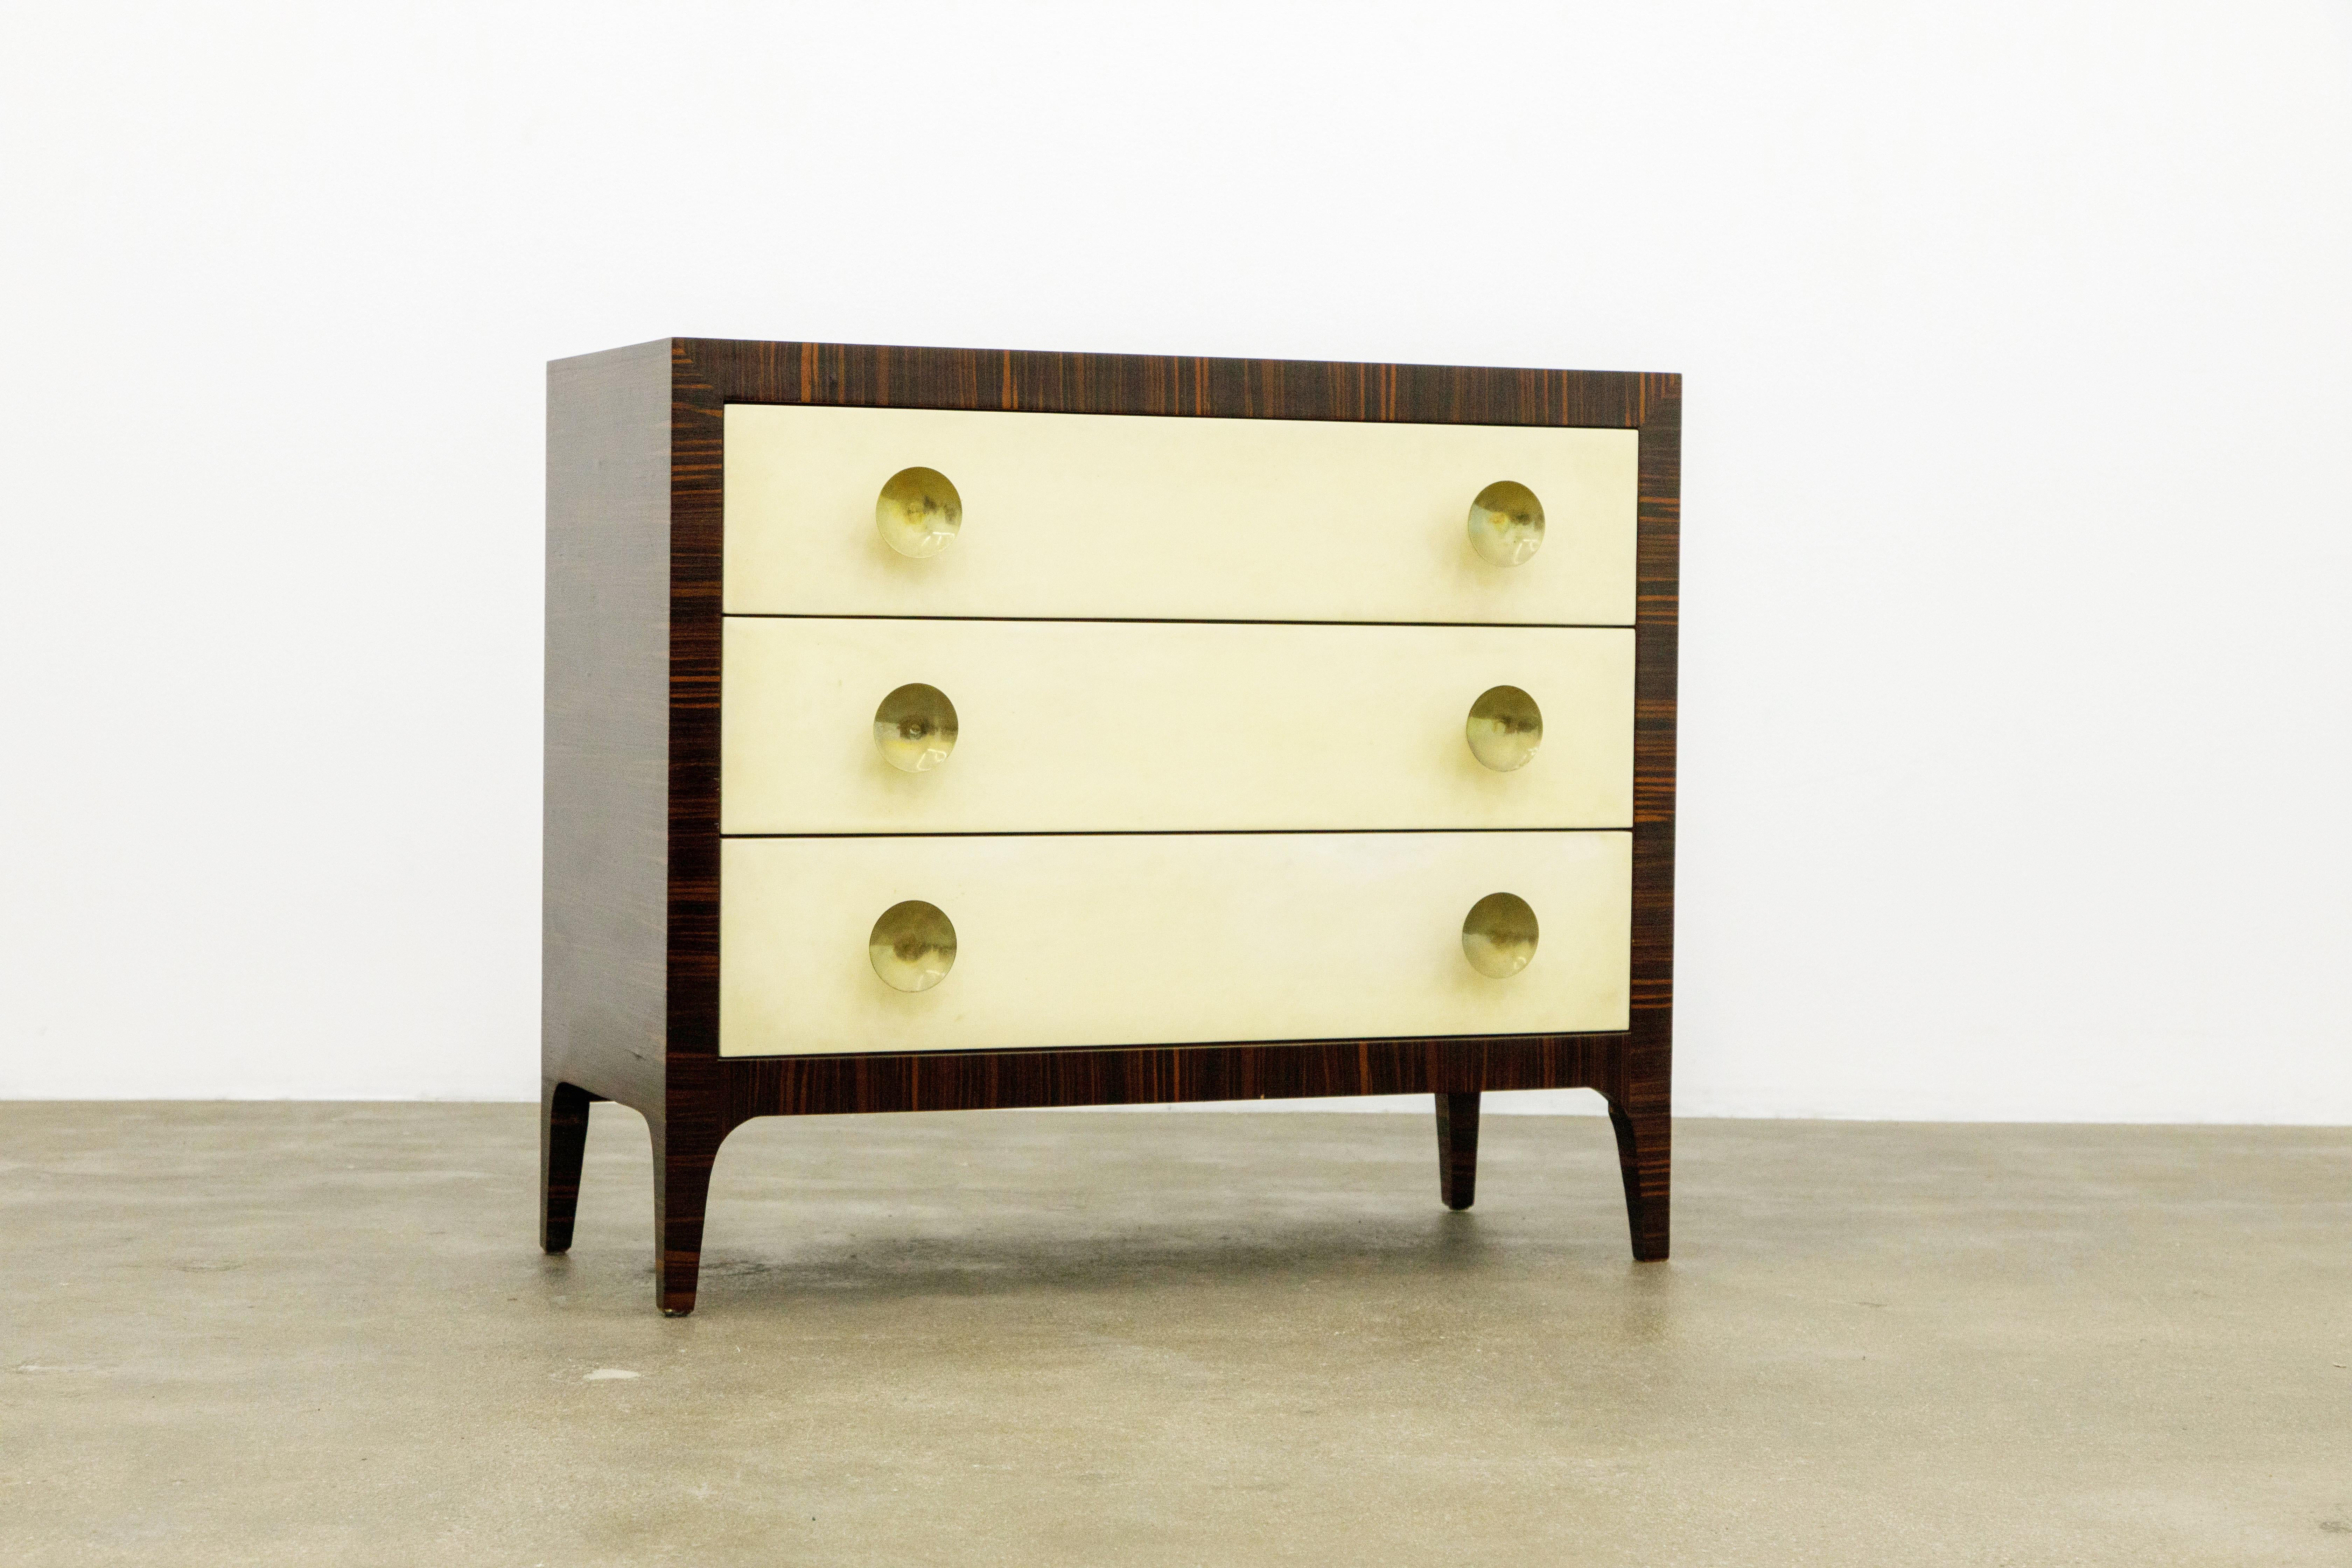 Art Deco Macassar Ebony, Brass and Parchment Deco Styled Chest of Drawers, circa 1970s